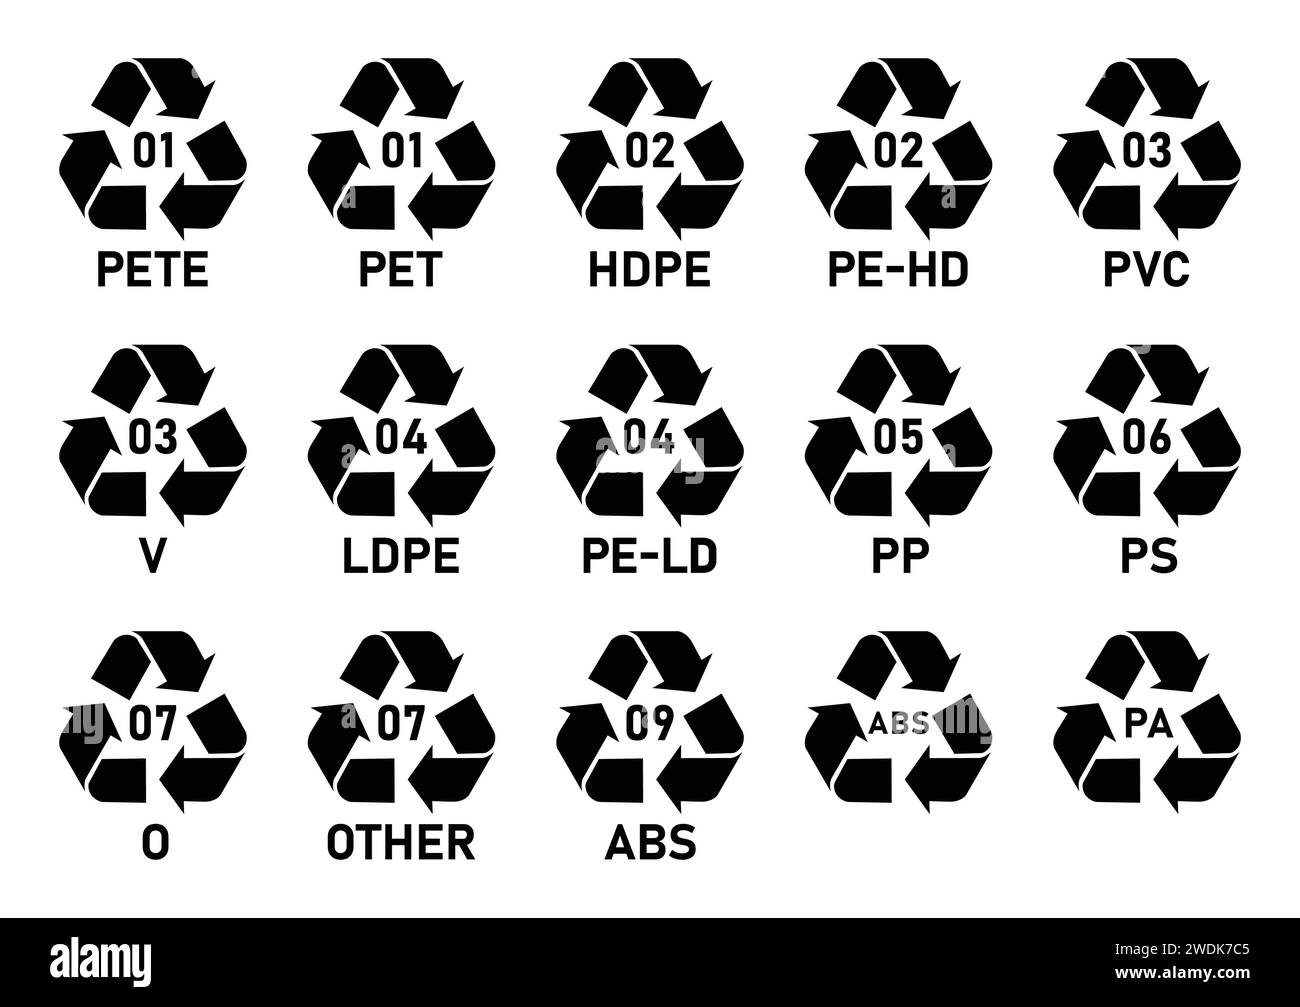 All plastic recycling code icon set. Mobius strip plastic recycling code icons isolated. Plastic recycling codes- 01 PET, 02 HDPE, 03 PVC, 07 OTHER. Stock Vector